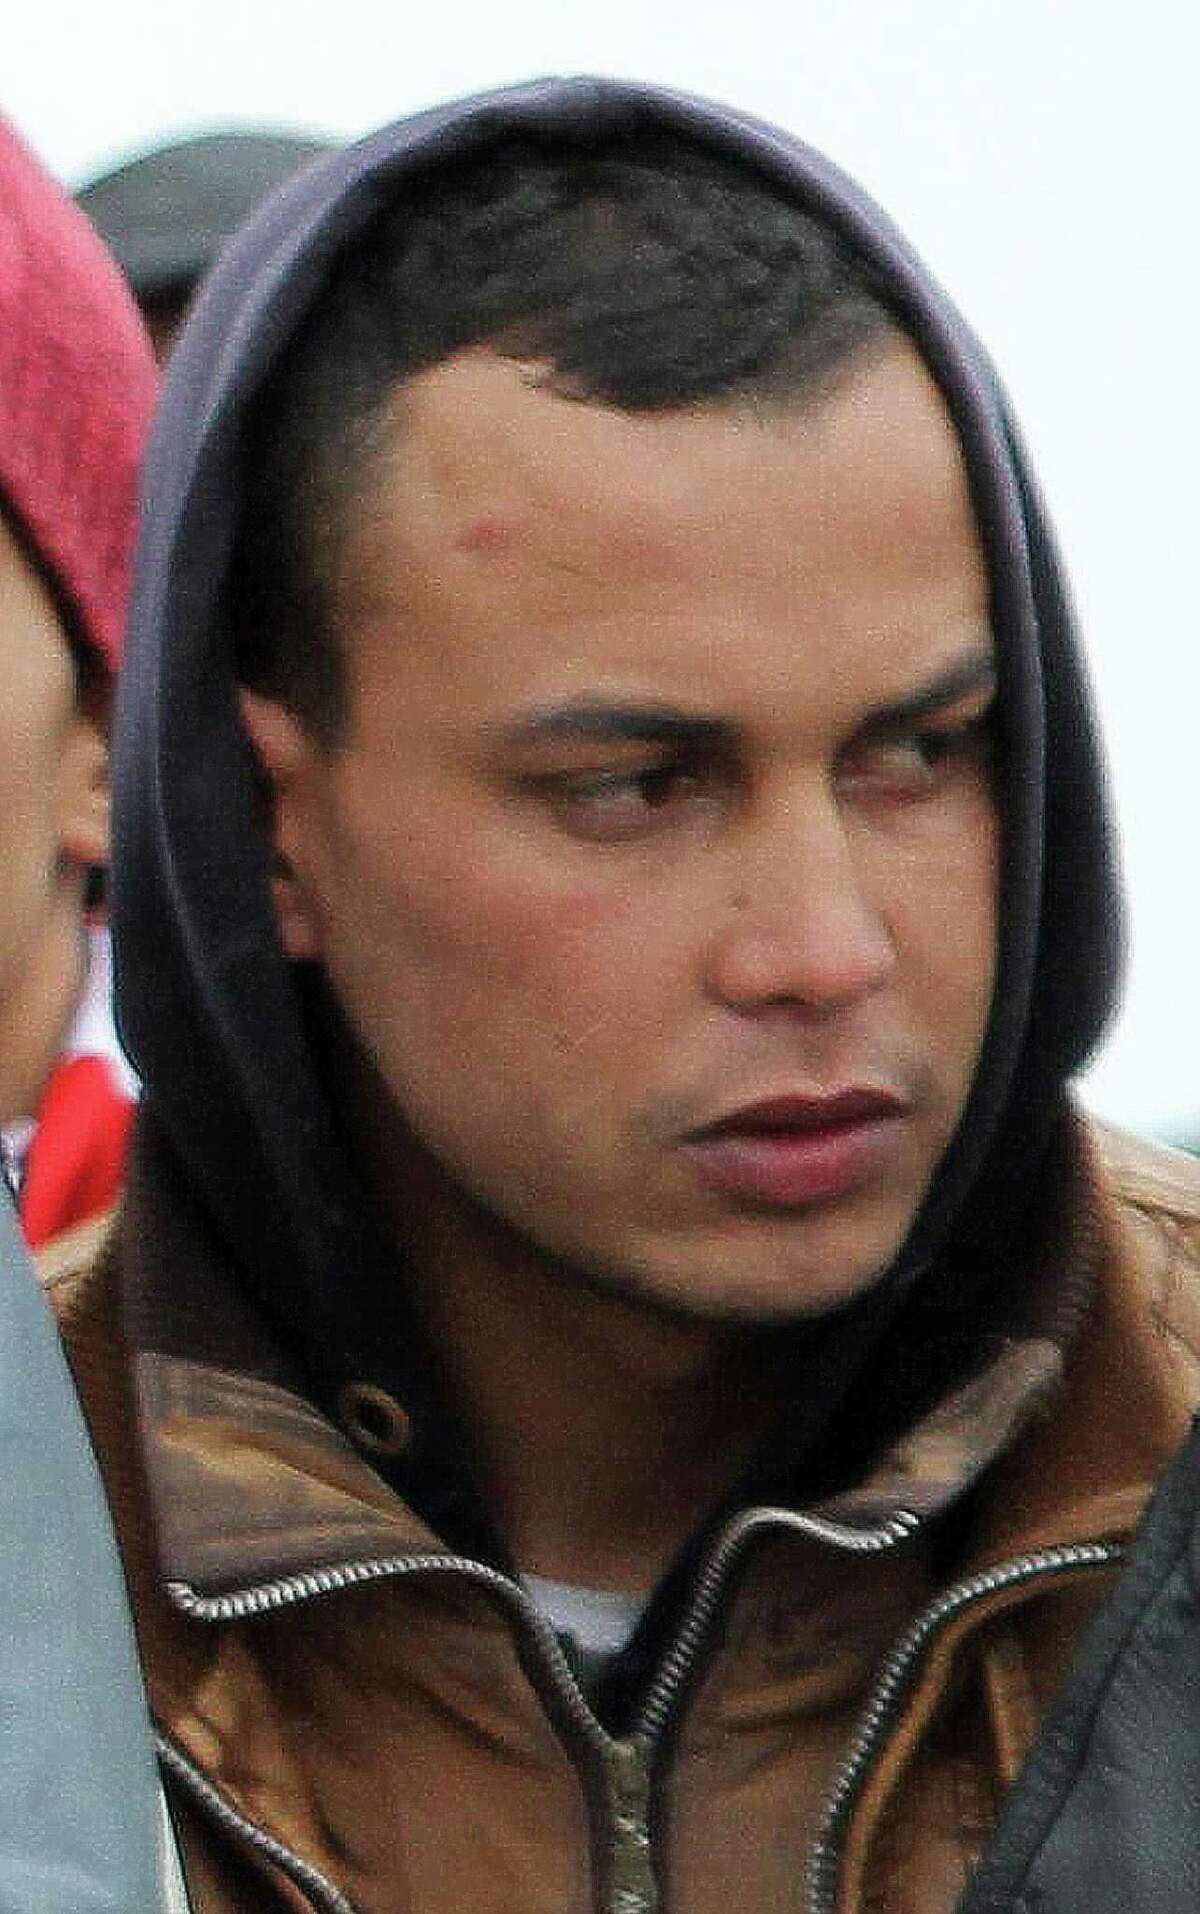 In this photo taken on Feb. 17 2015, Abdelmajid Touil, right, waits to be disembarked in Porto Empedocle, Sicily, Italy. Touil Abdelmajid was arrested Tuesday evening at the home of his mother in Gaggiano, near Milan. Italian police have arrested the Moroccan man on a Tunisian arrest warrant accusing him of helping organize and execute the March 18 attack on Tunisia's Bardo museum that left 22 people dead, authorities said. (Pasquale Claudio Montana Lampo/ANSA via AP Photo) - ITALY OUT